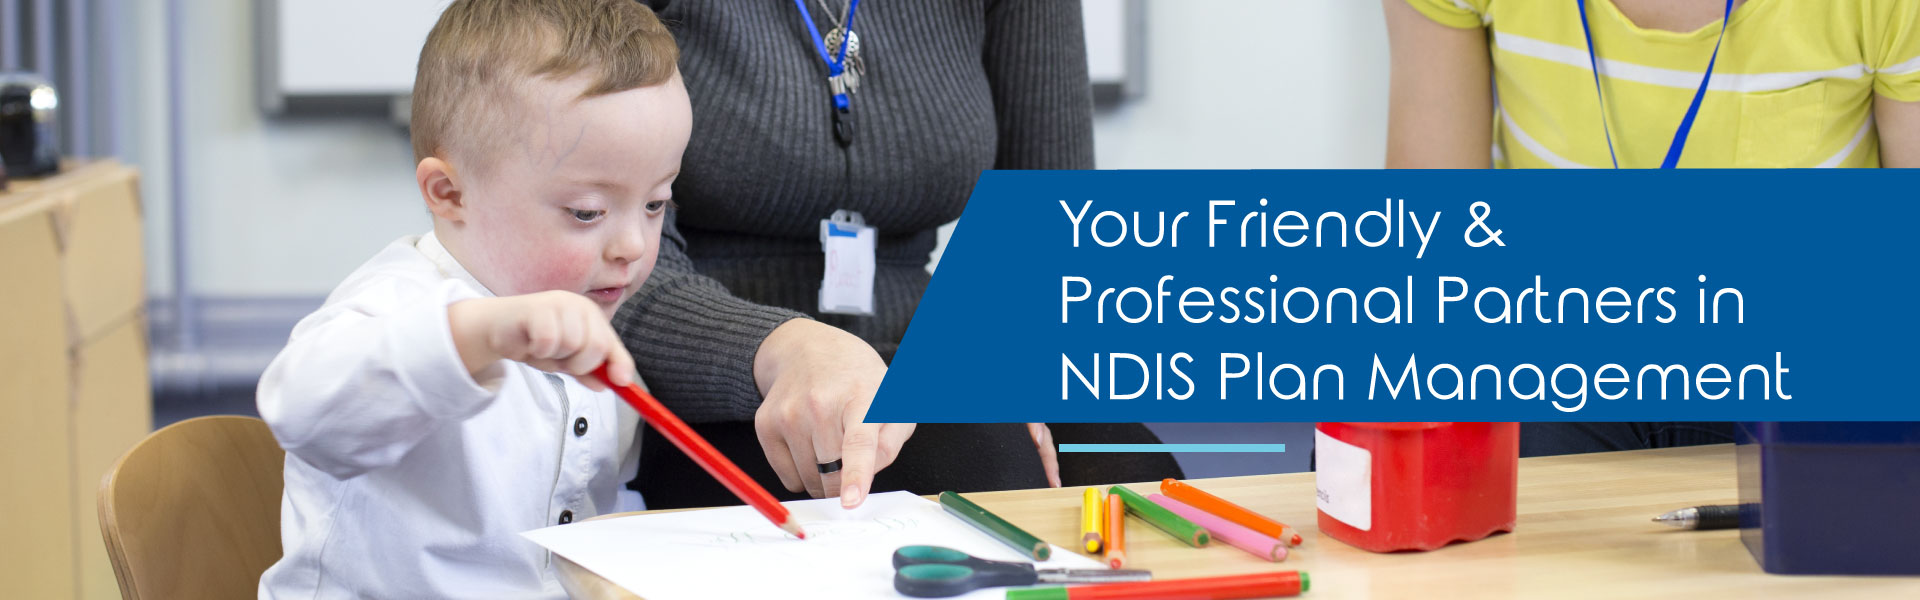 Your friend and professional partners in NDIS Plan Management